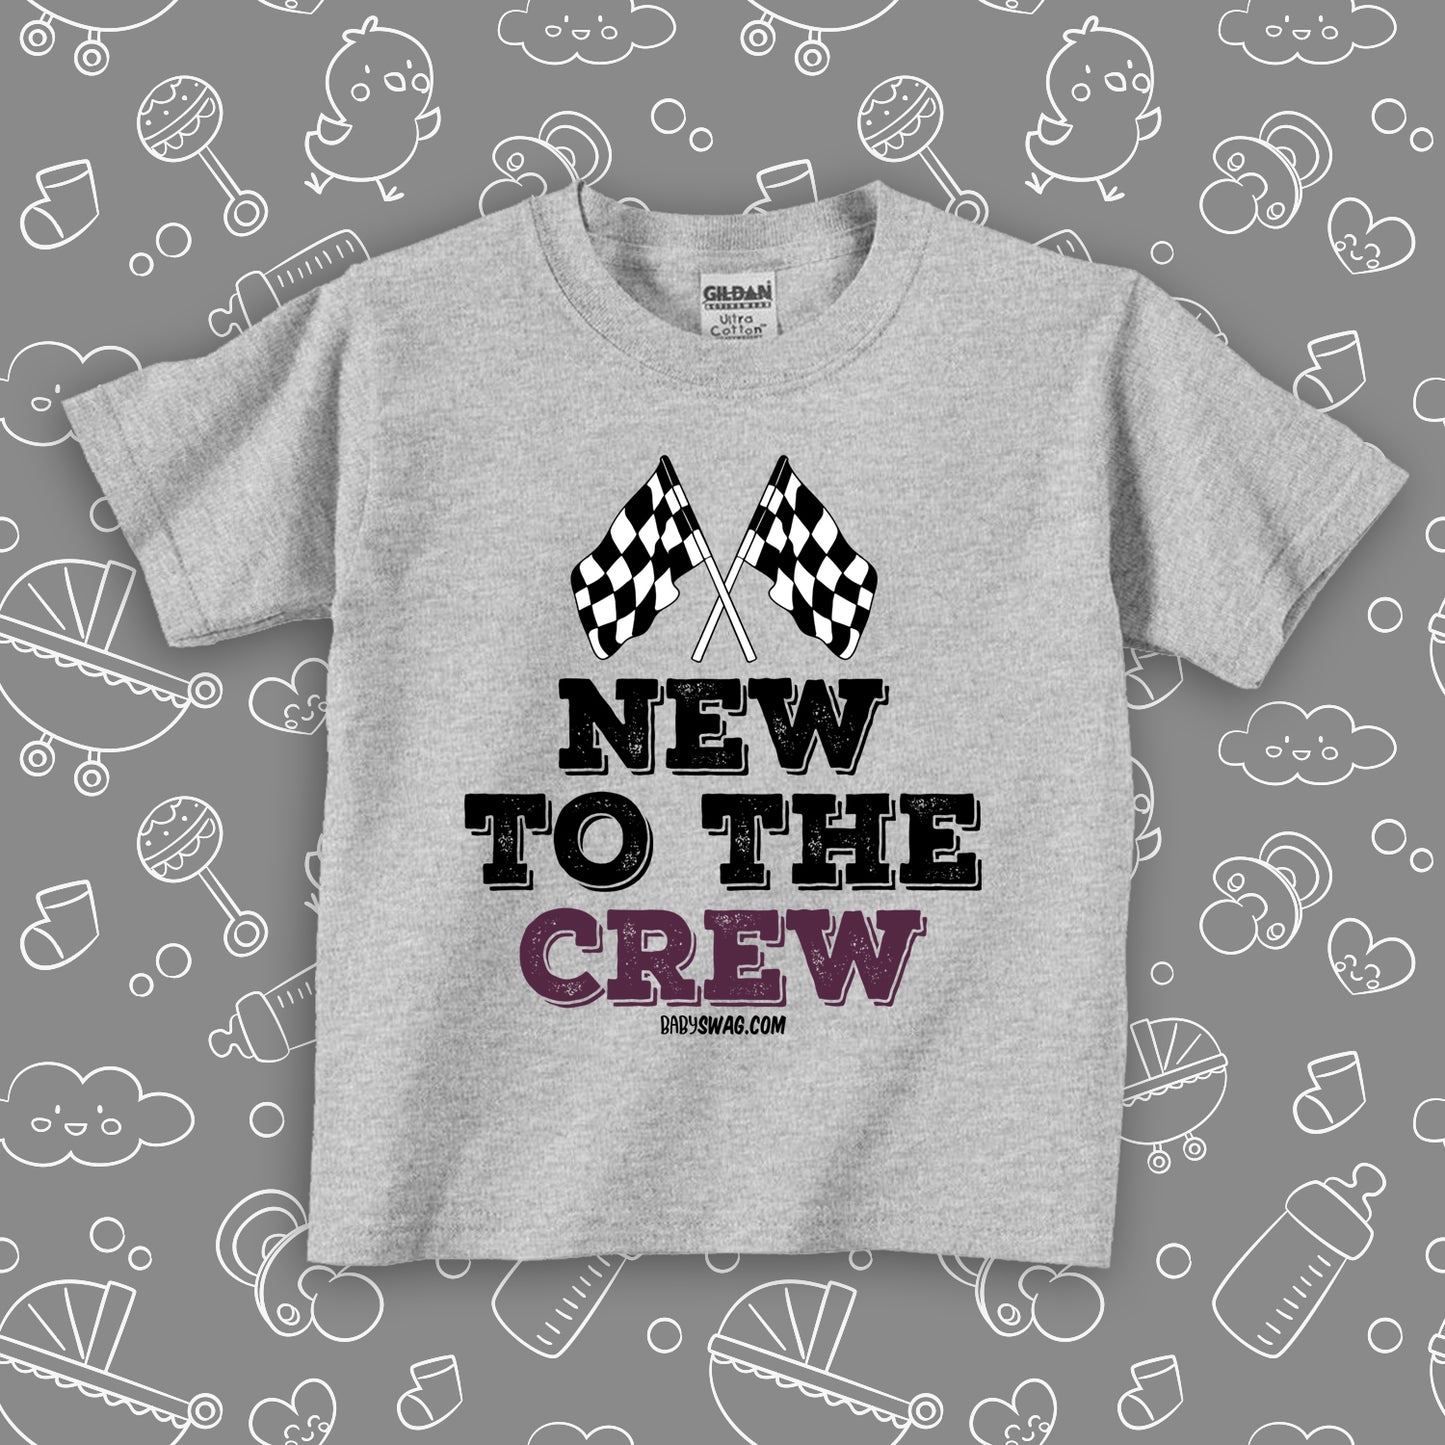 Toddler boy shirt with saying "New To The Crew" in grey. 